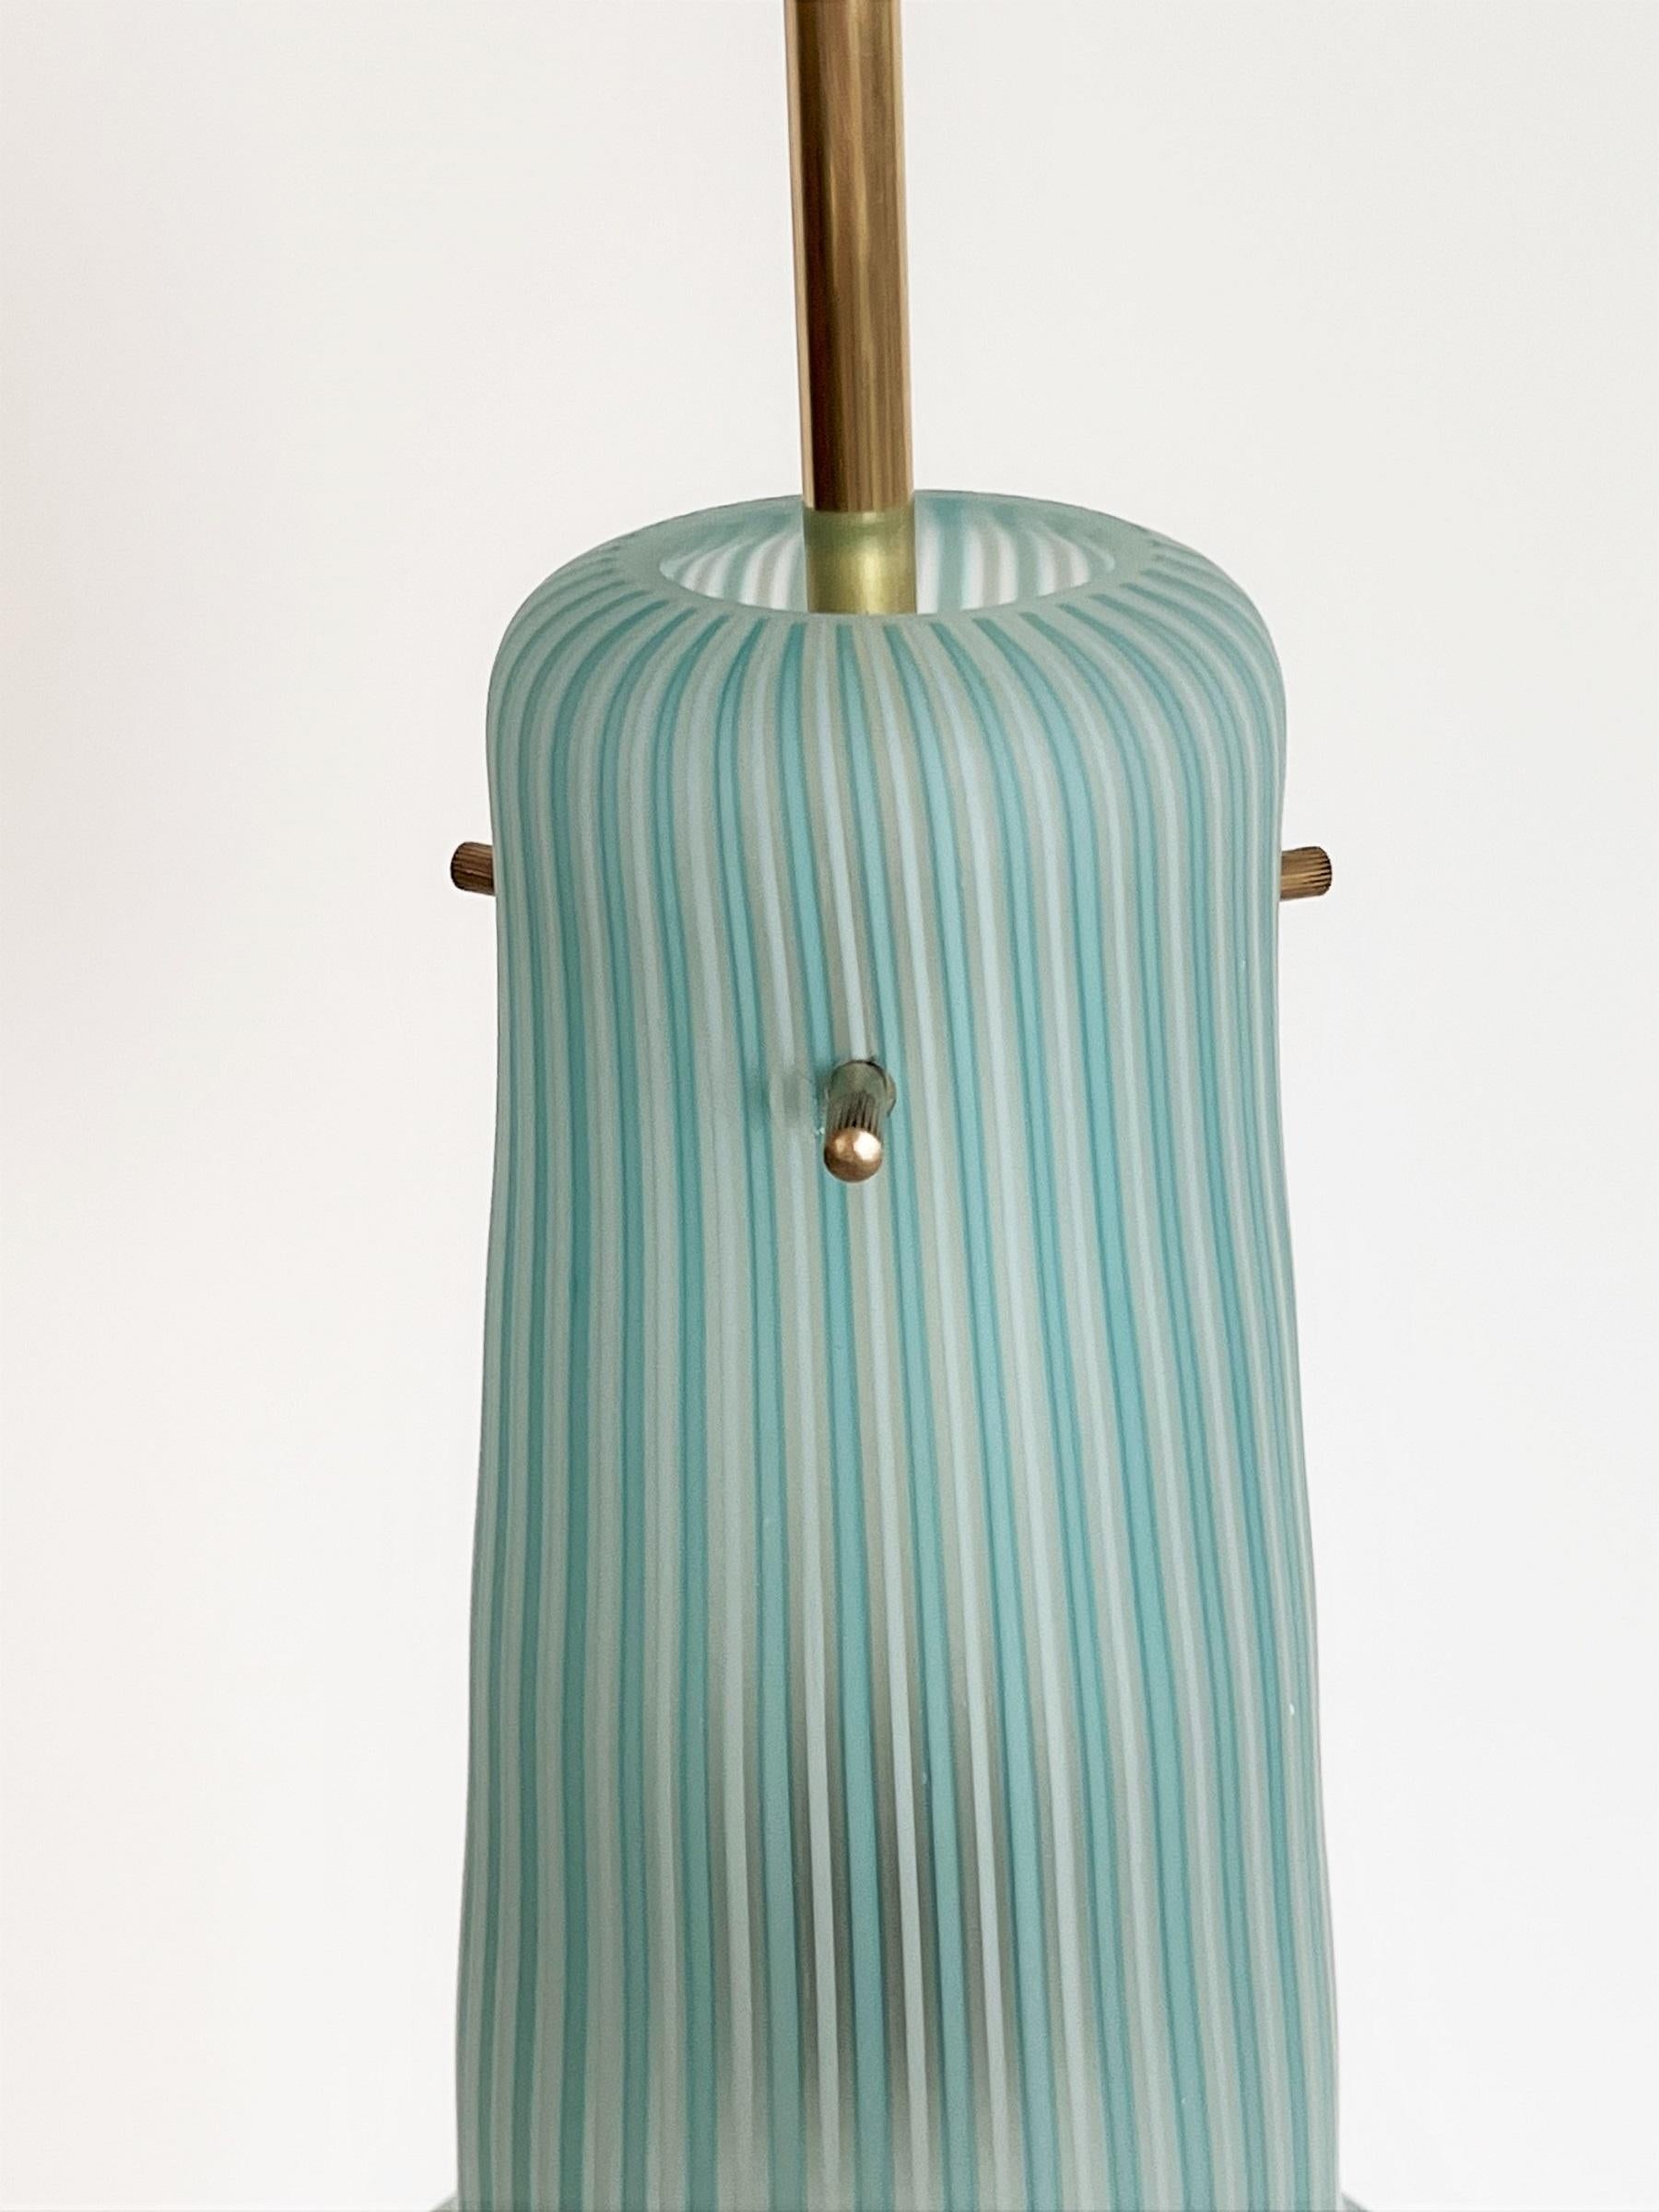 Italian Mid-Century Pendant Lamp in Striped Glass and Brass by Venini, 1960s For Sale 1